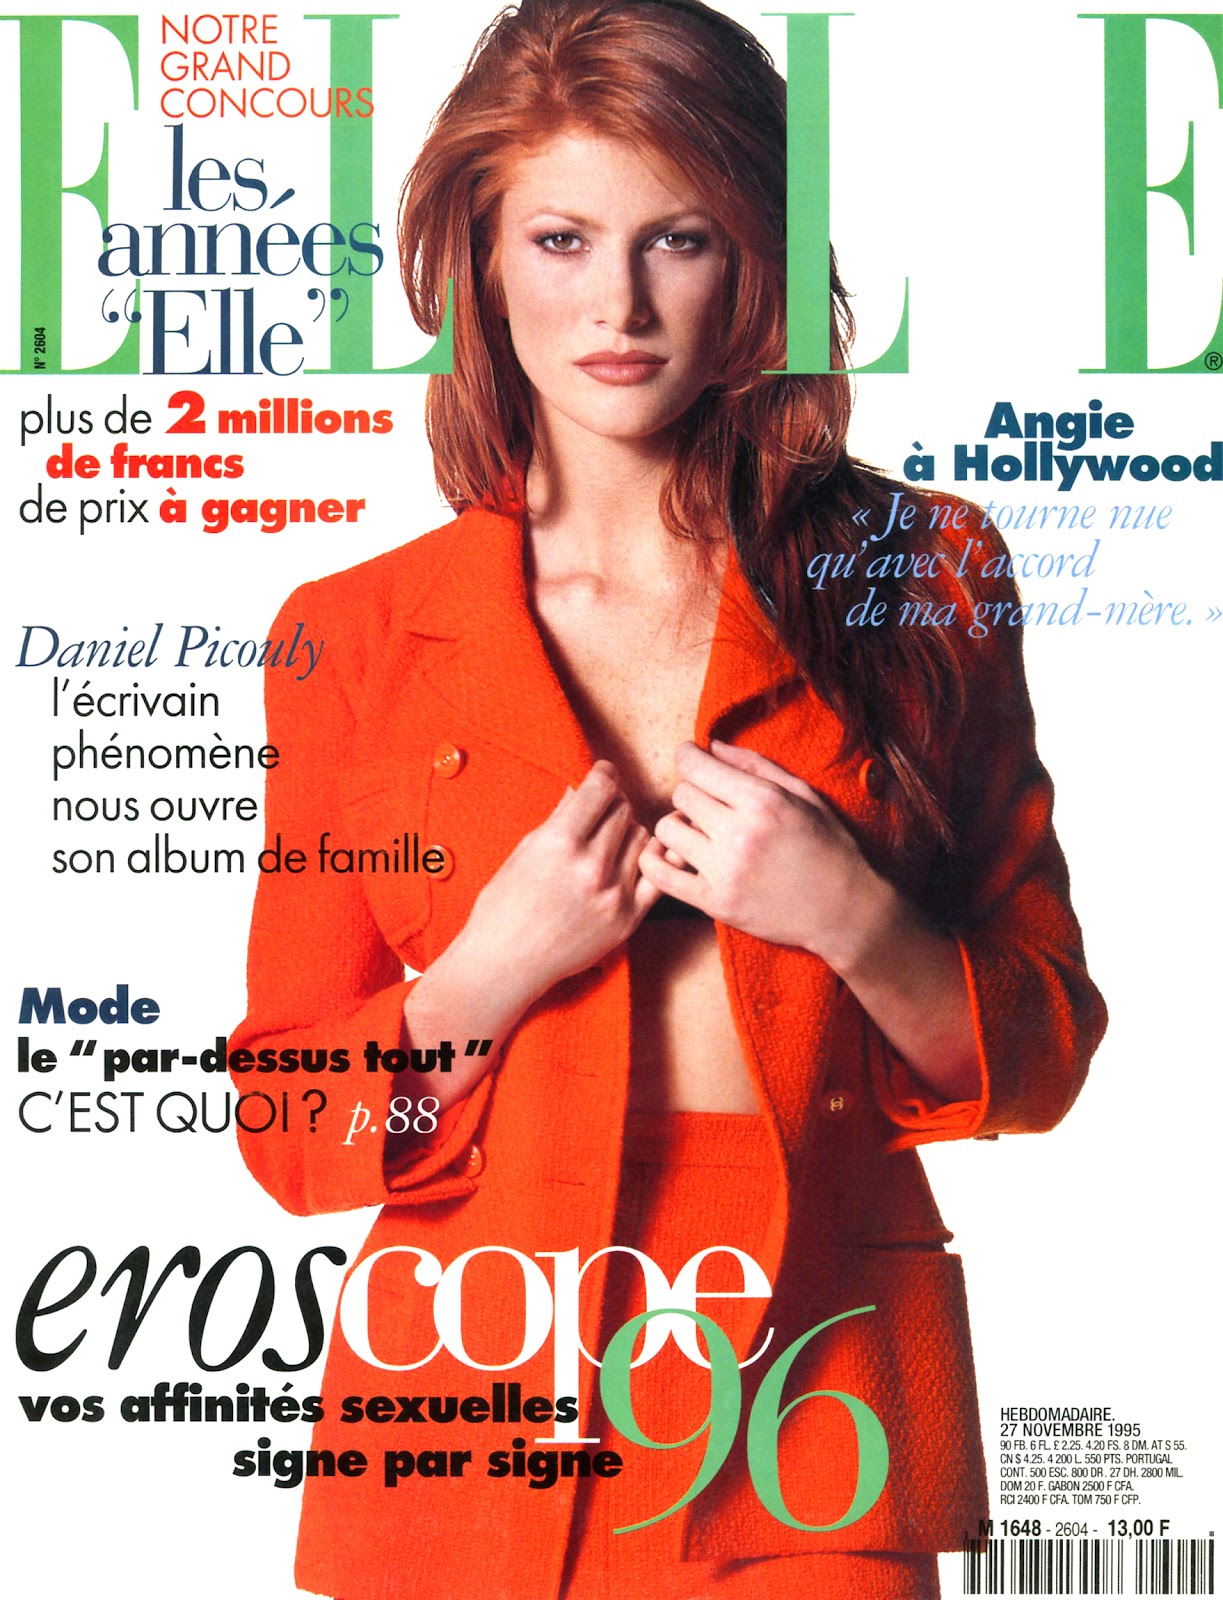 Angie_Everhart_--_Mix_Of_ELLE_Magazine_88To95_000.jpg